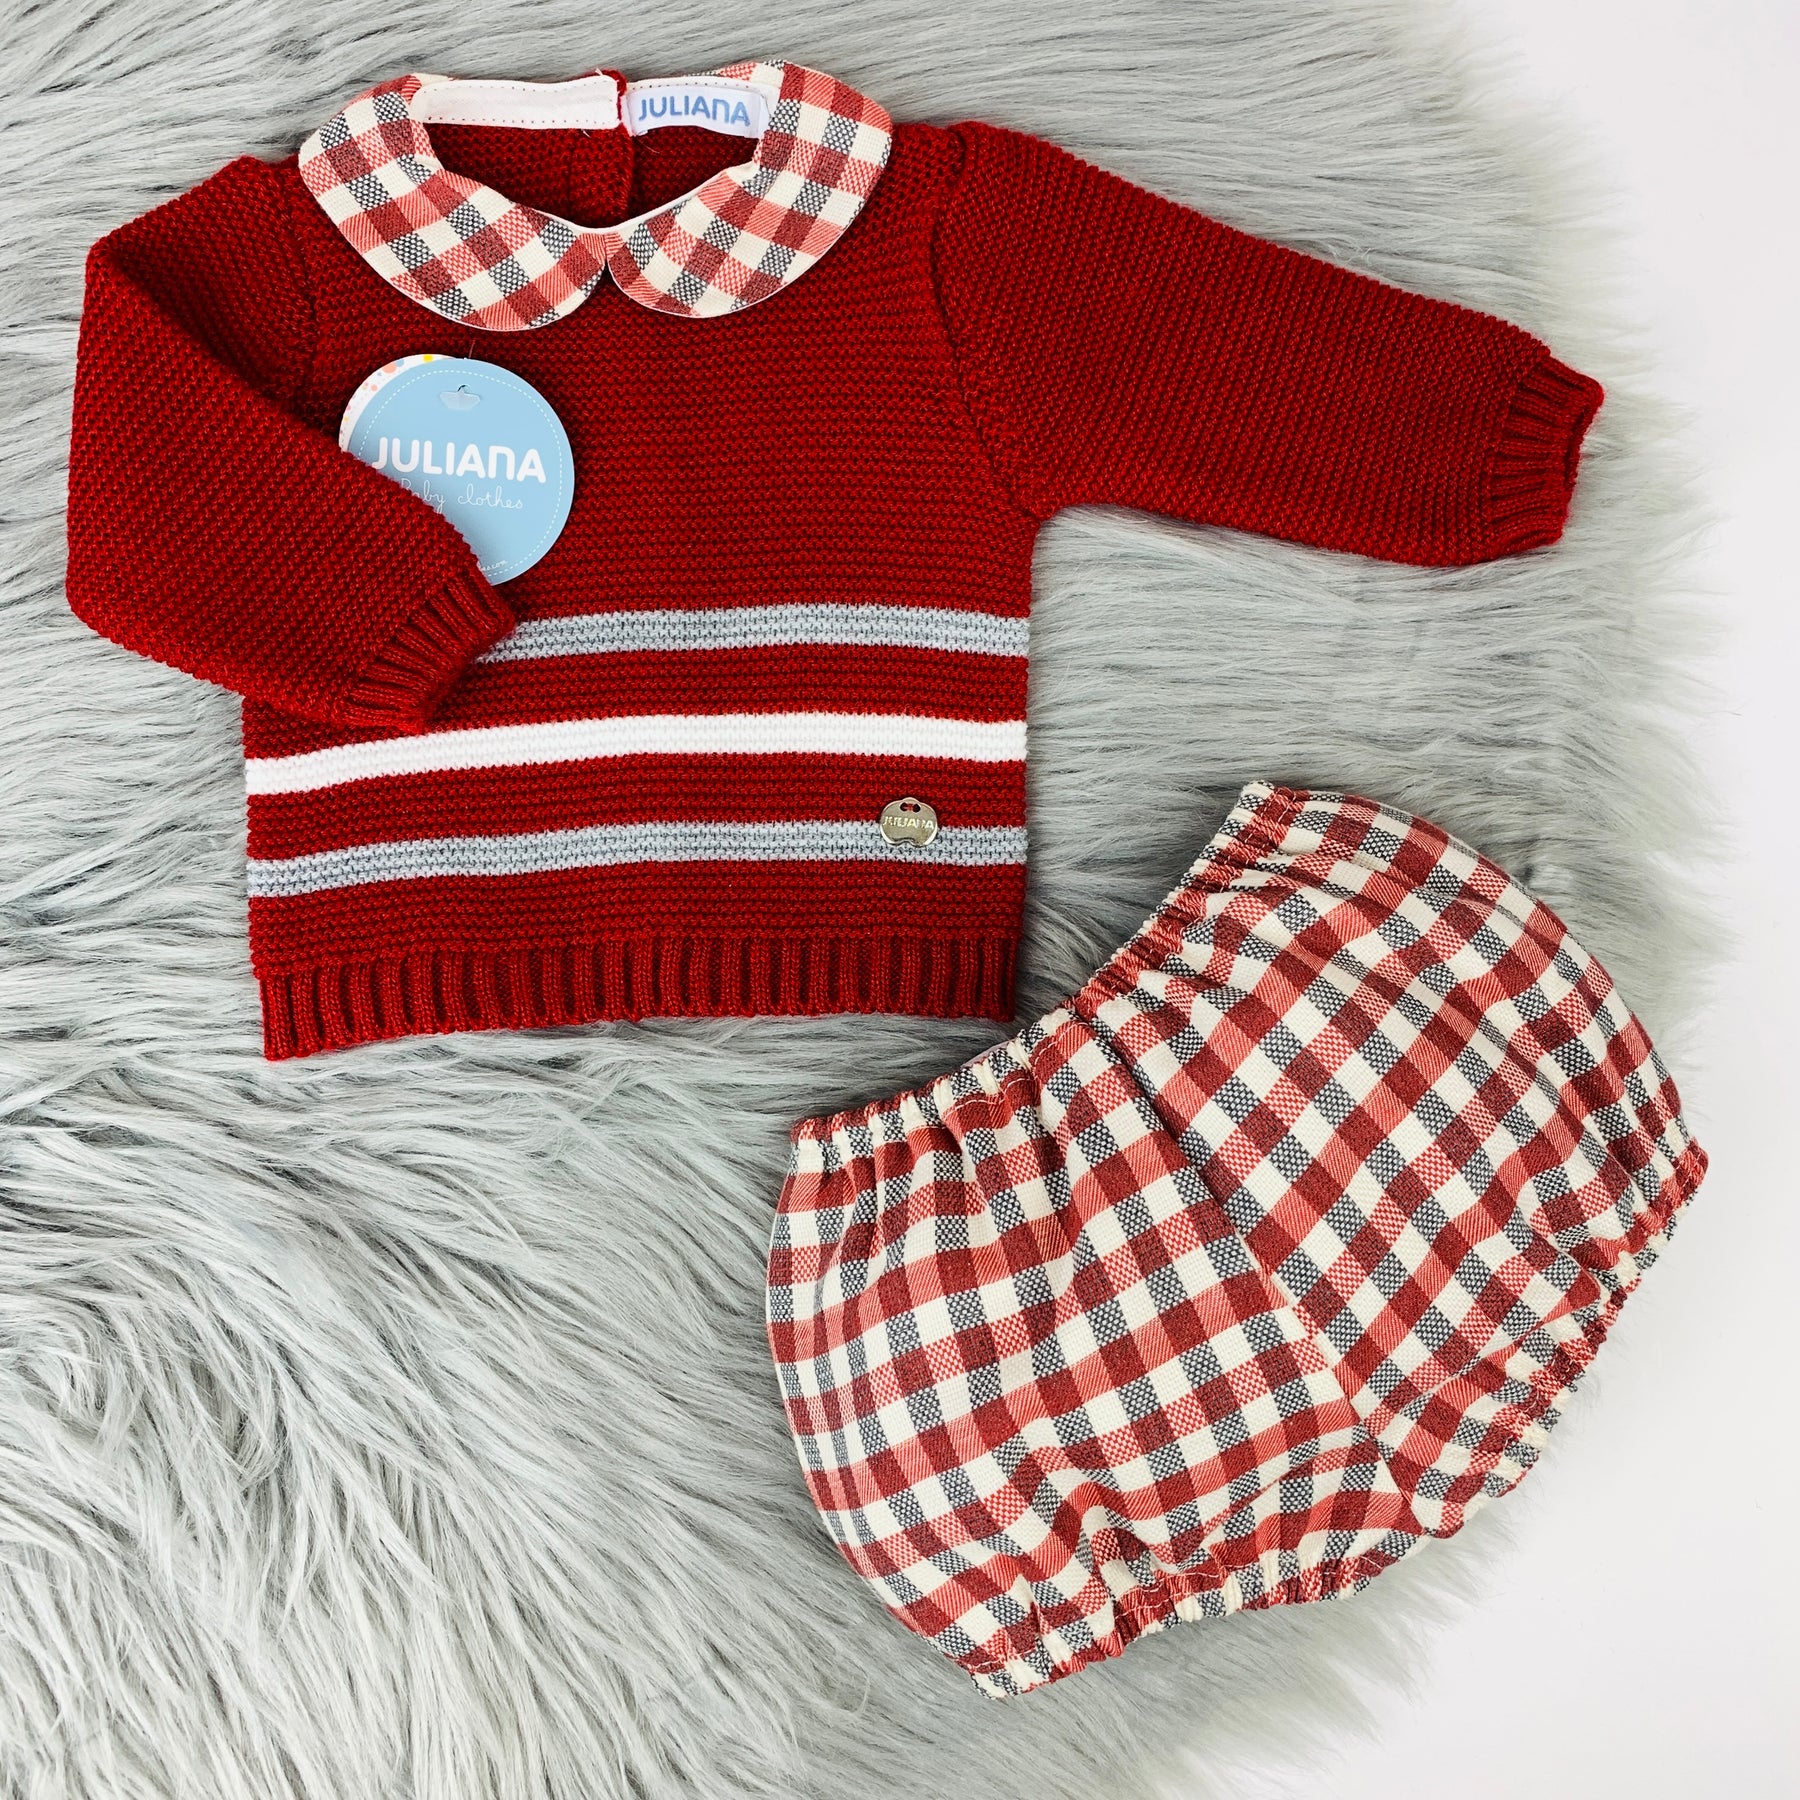 Juliana Spanish Baby Clothes | Bows Baby Boutique